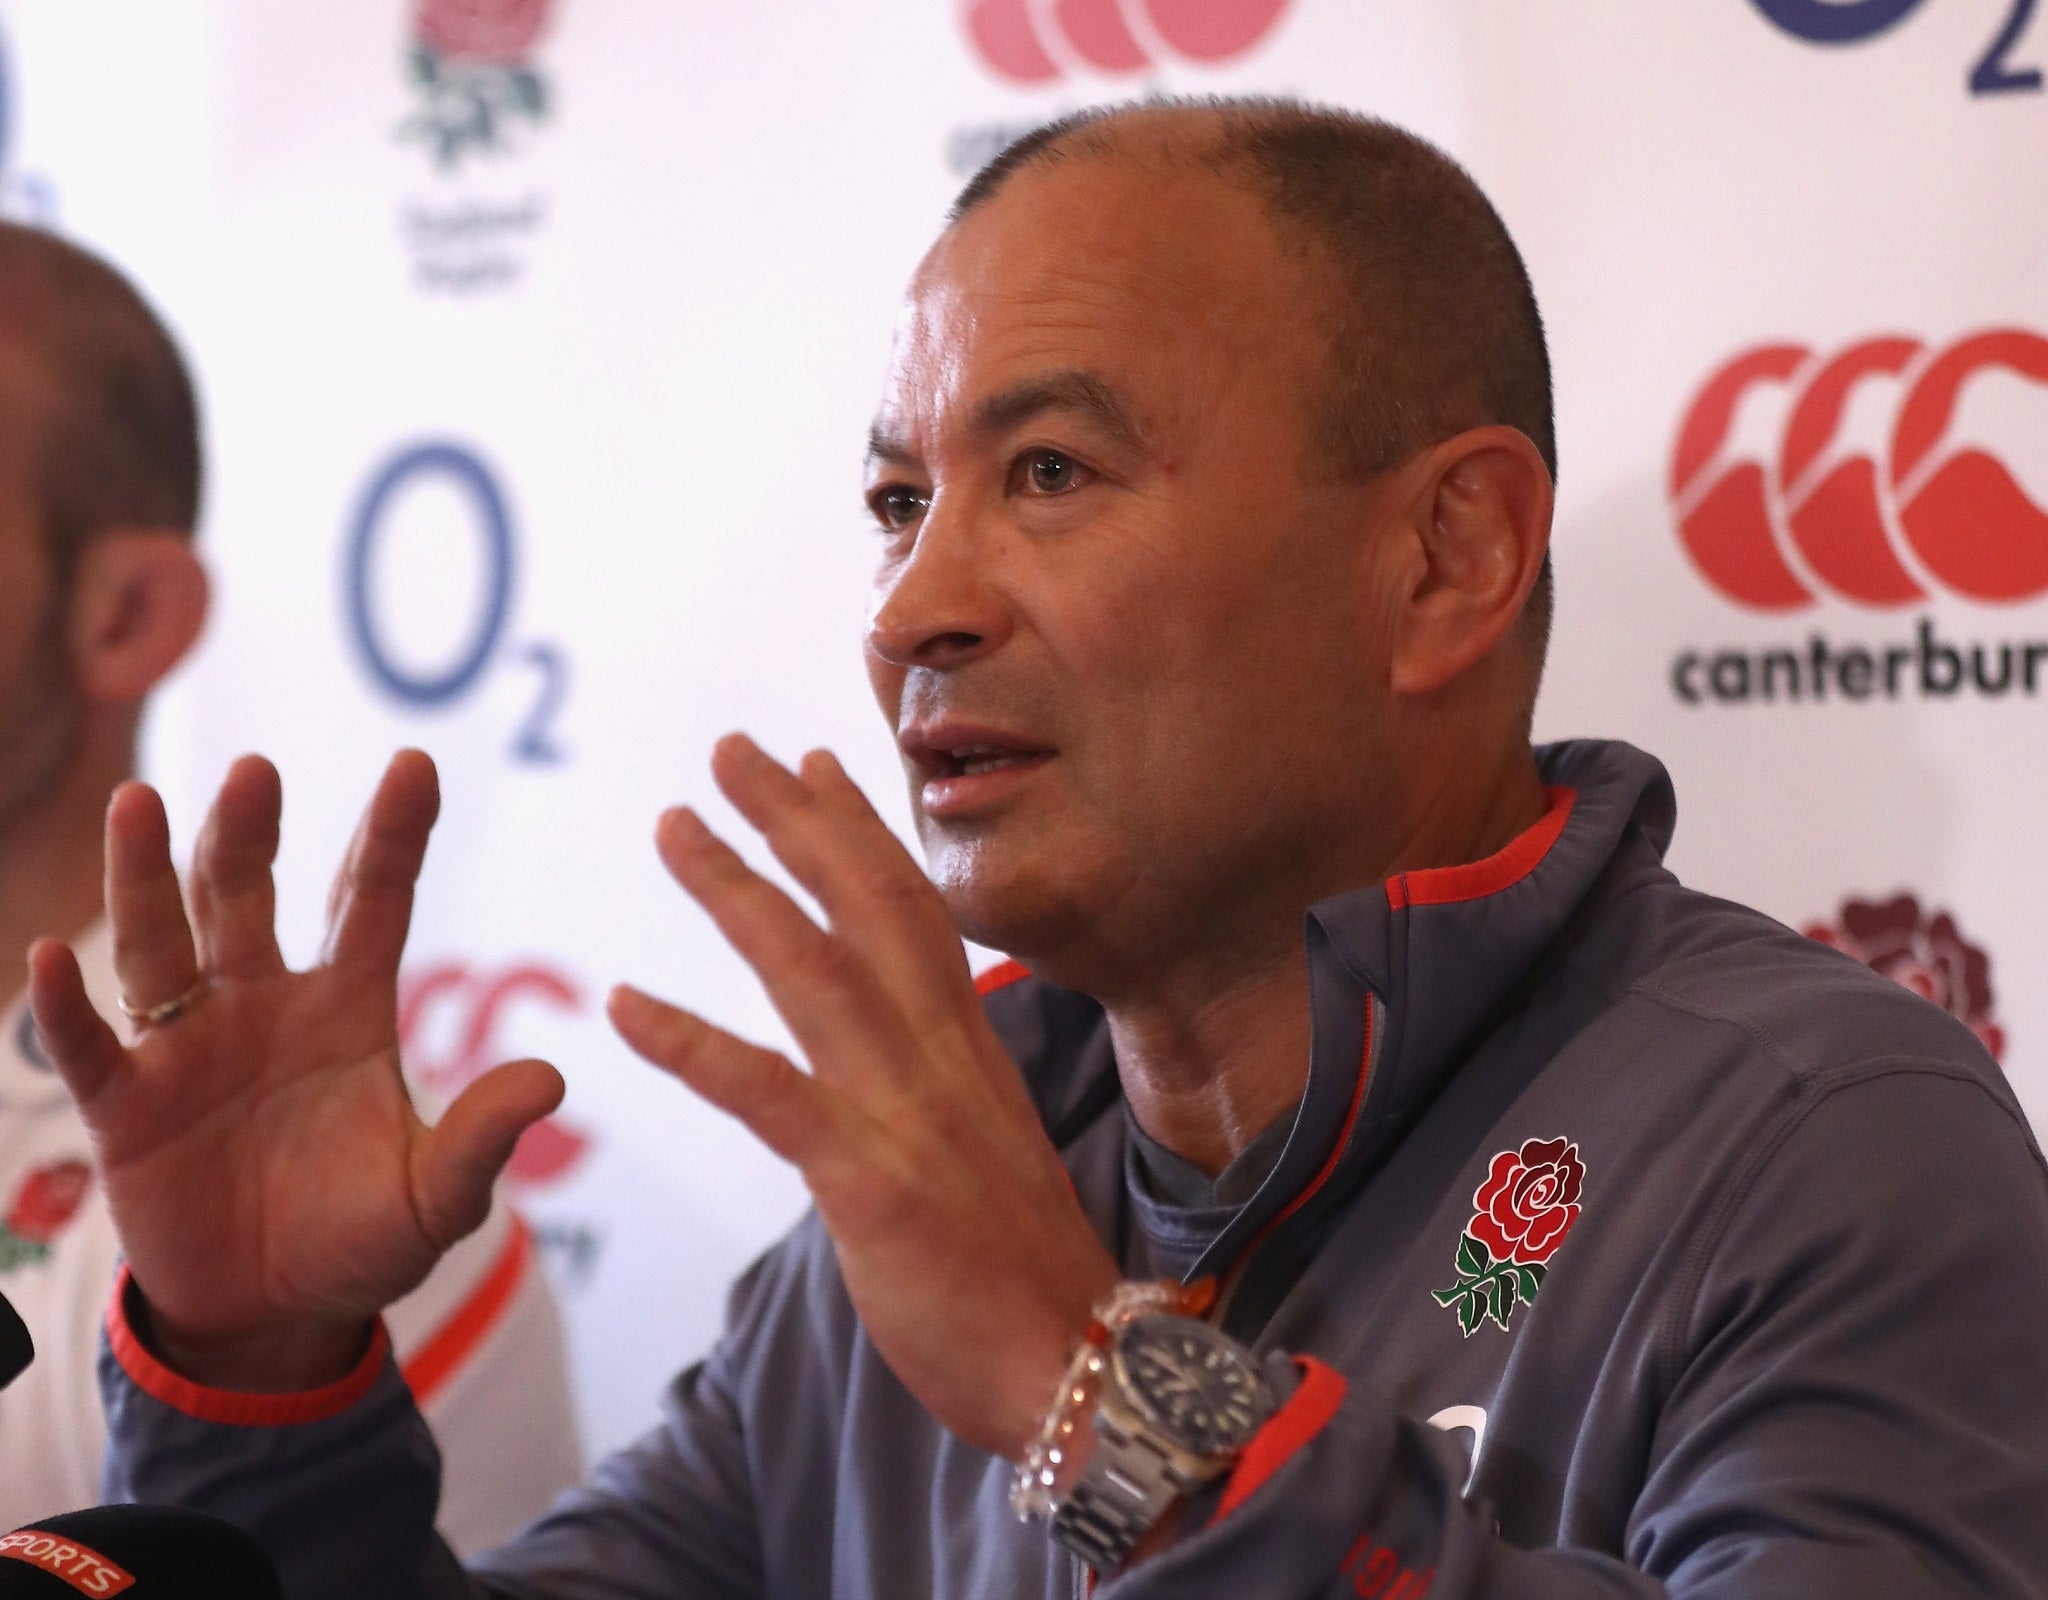 Eddie Jones has stressed the importance of winning consecutive Grand Slams to his squad